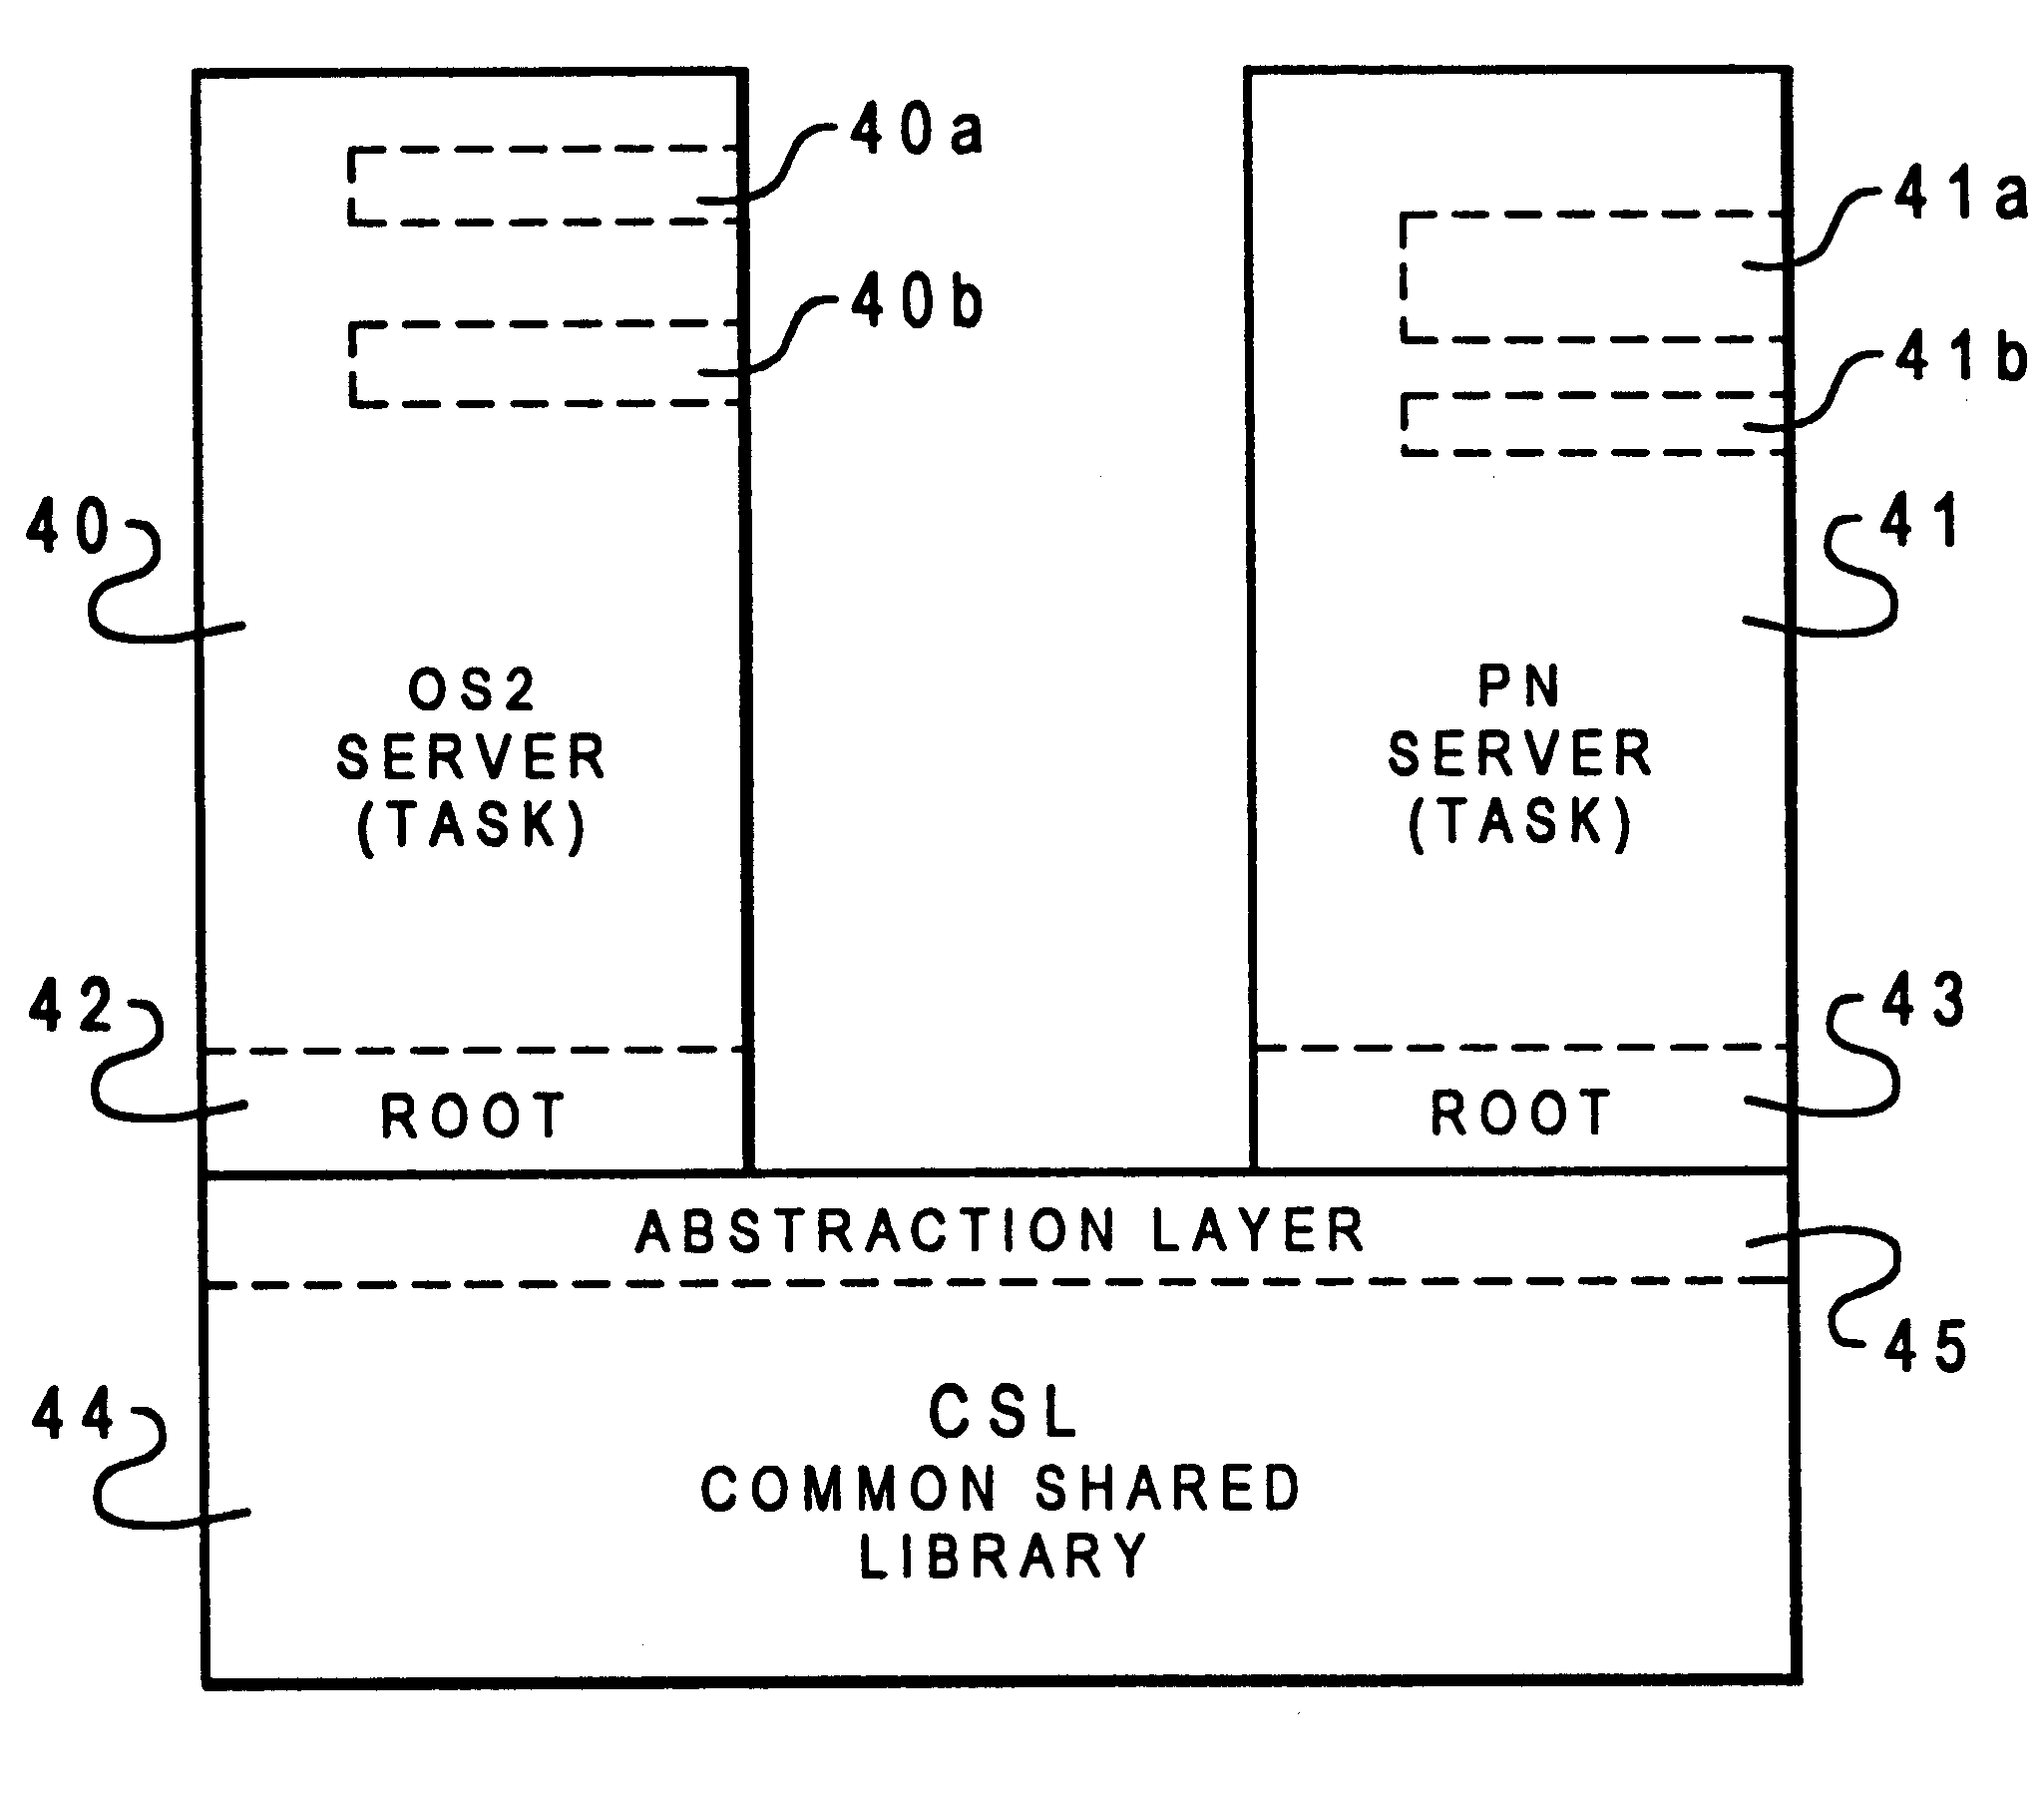 System and method for providing shared global offset table for common shared library in a computer system